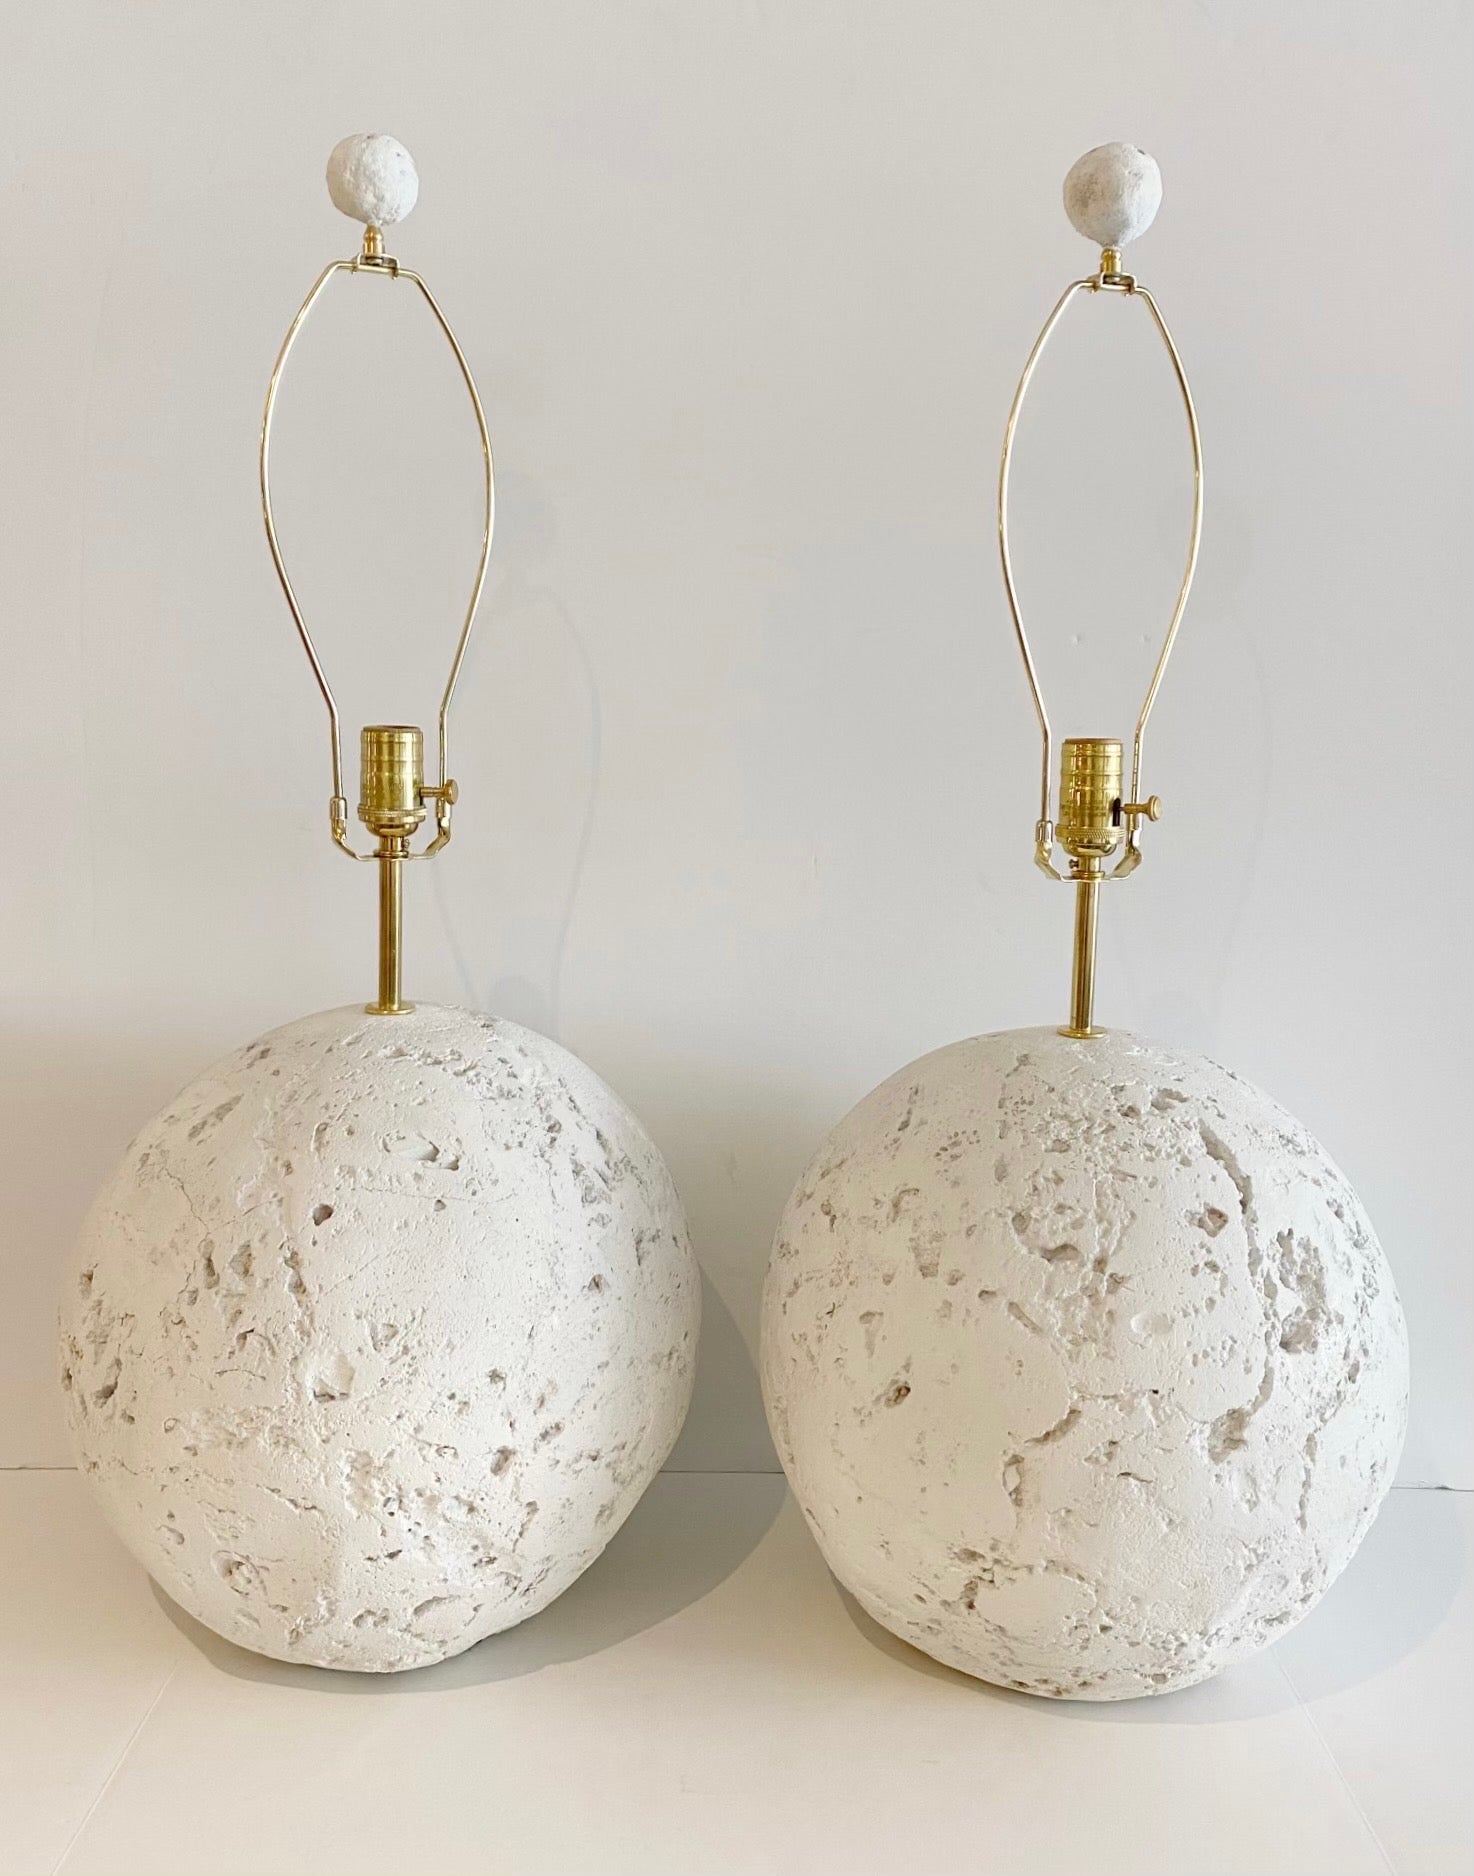 Large Pair of midcentury Coquina Coral Stone Style Orb Lamps 
USA, circa 1970s
Each one of sculpted naturalistic form, realistically cast and modeled. Fitted with fine brass lamp fittings. Complete with harps and matching finials. Ready to shade